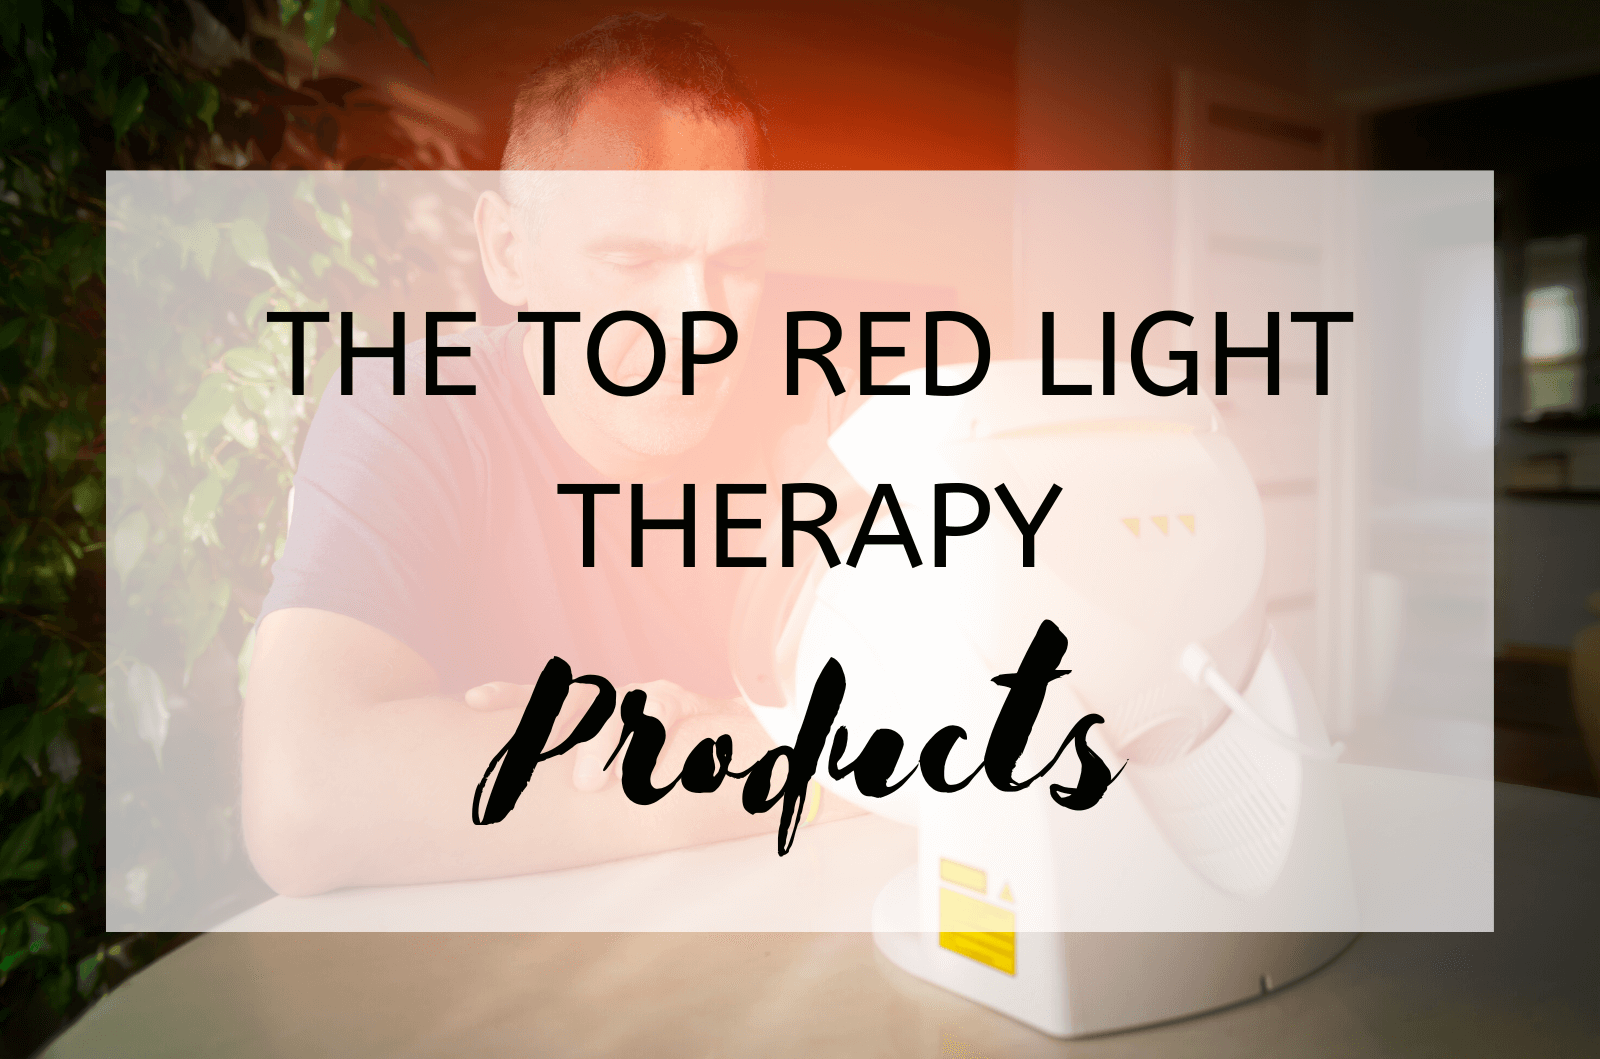 The Top Red Light Therapy Products